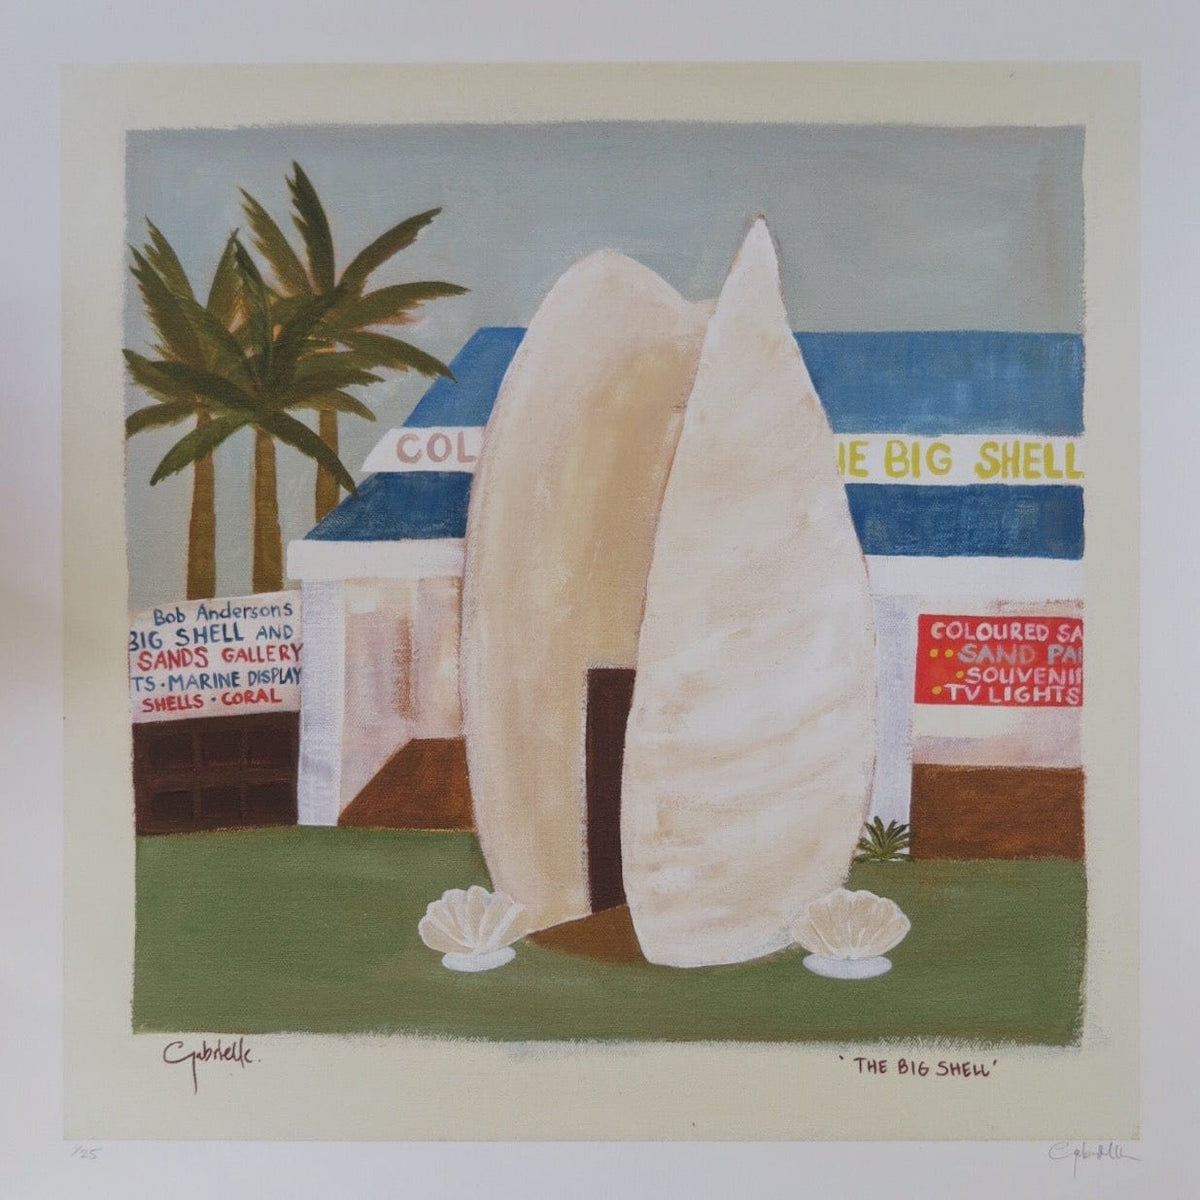 The Big Shell - Limited Edition Print